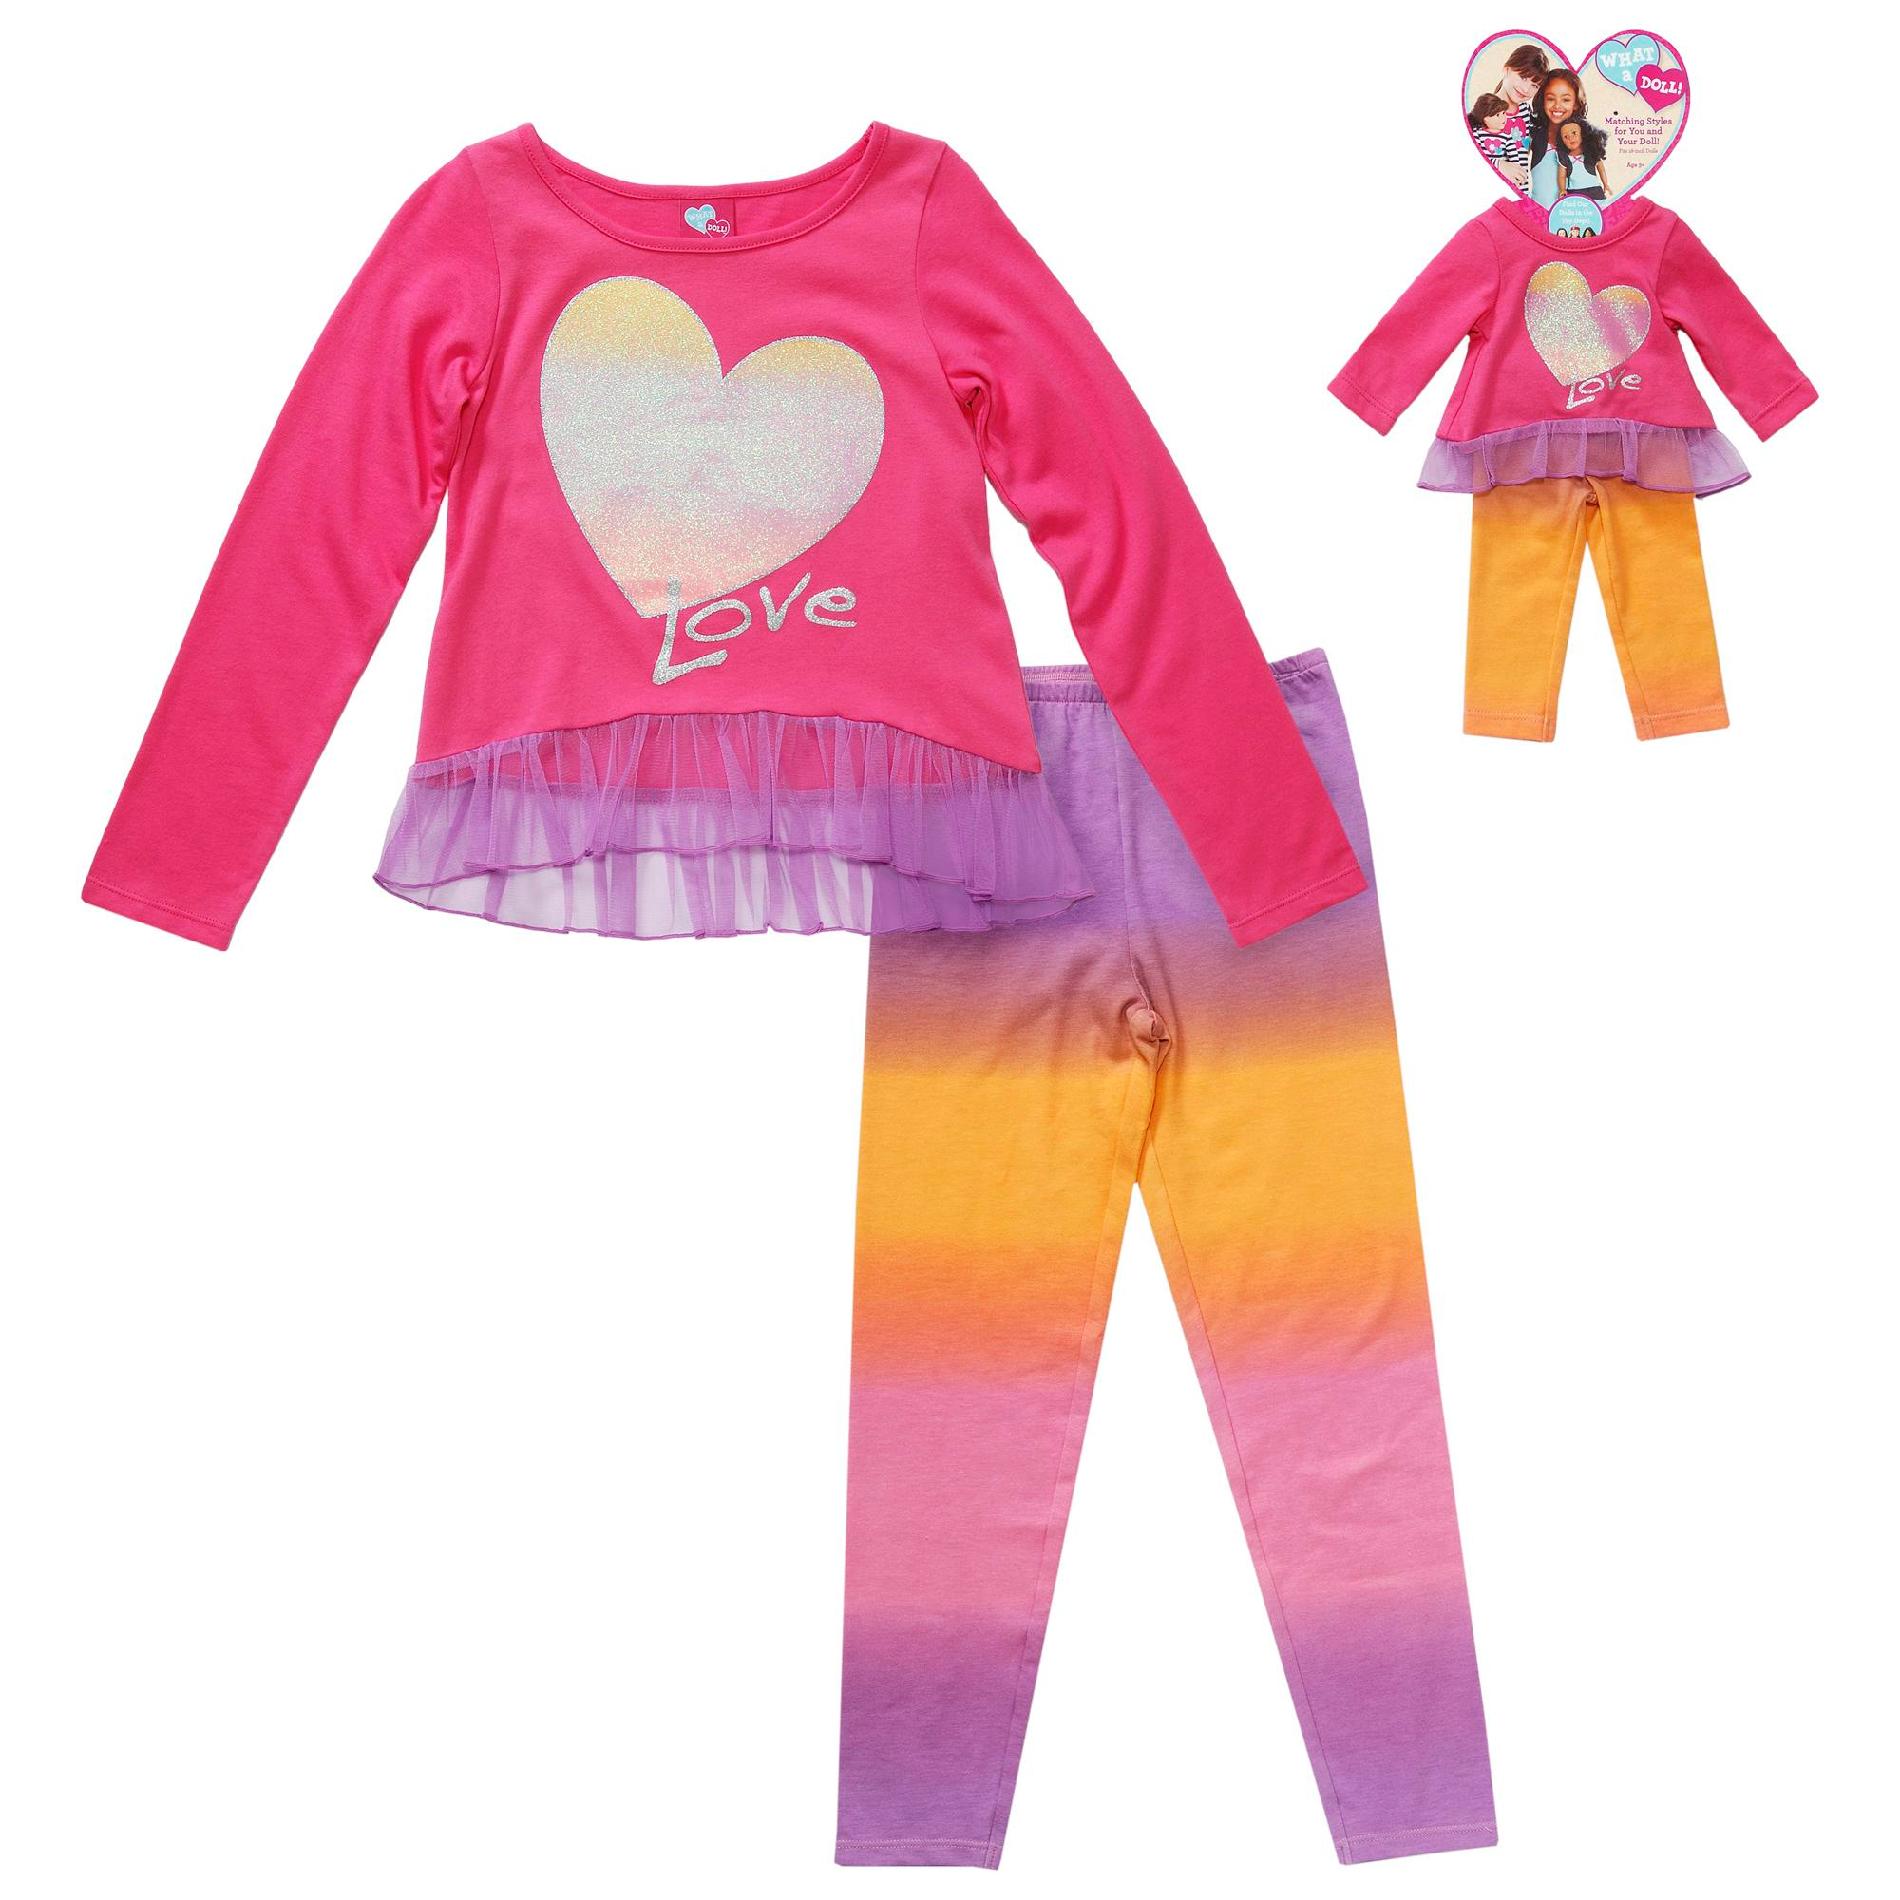 What A Doll Girl's T-Shirt  Leggings & Doll Outfit - Love